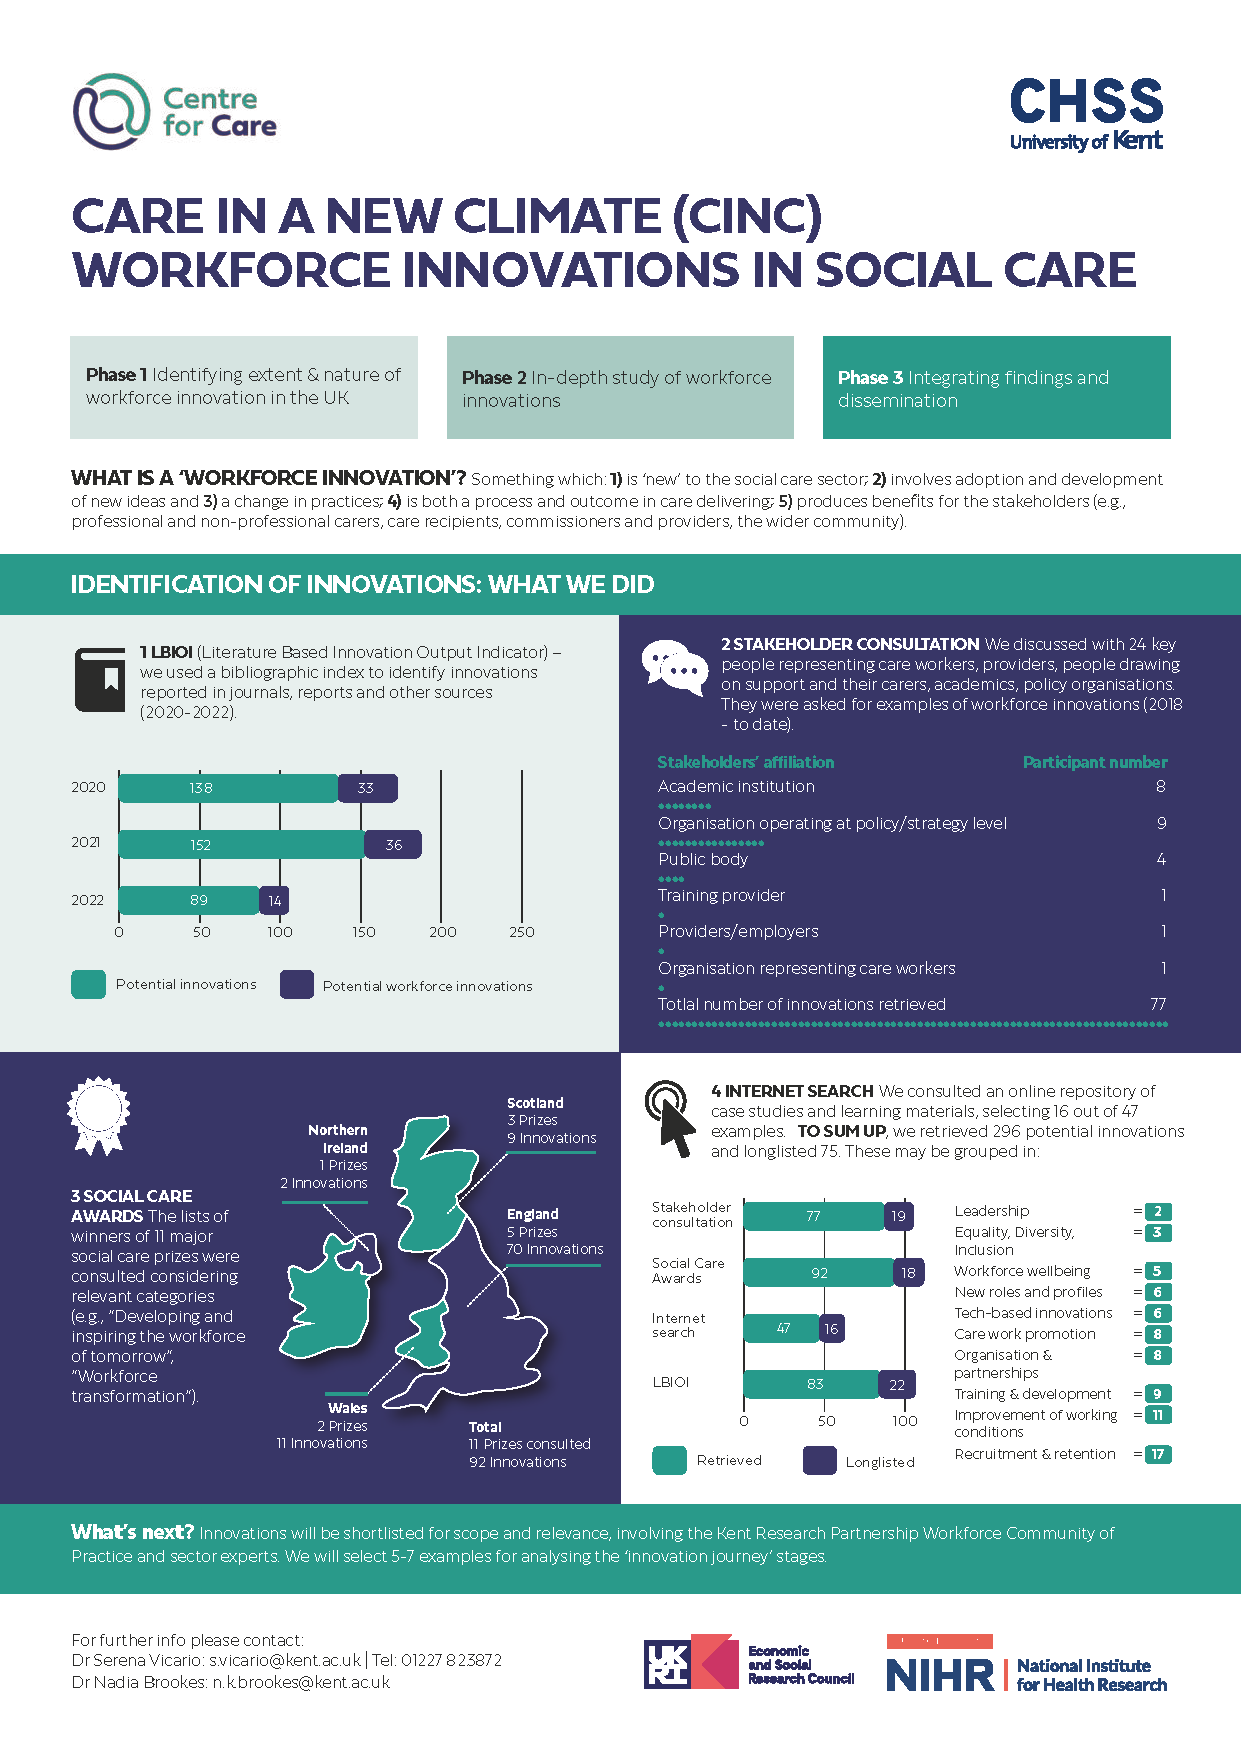 CARE IN A NEW CLIMATE (CINC)
WORKFORCE INNOVATIONS IN SOCIAL CARE infographic